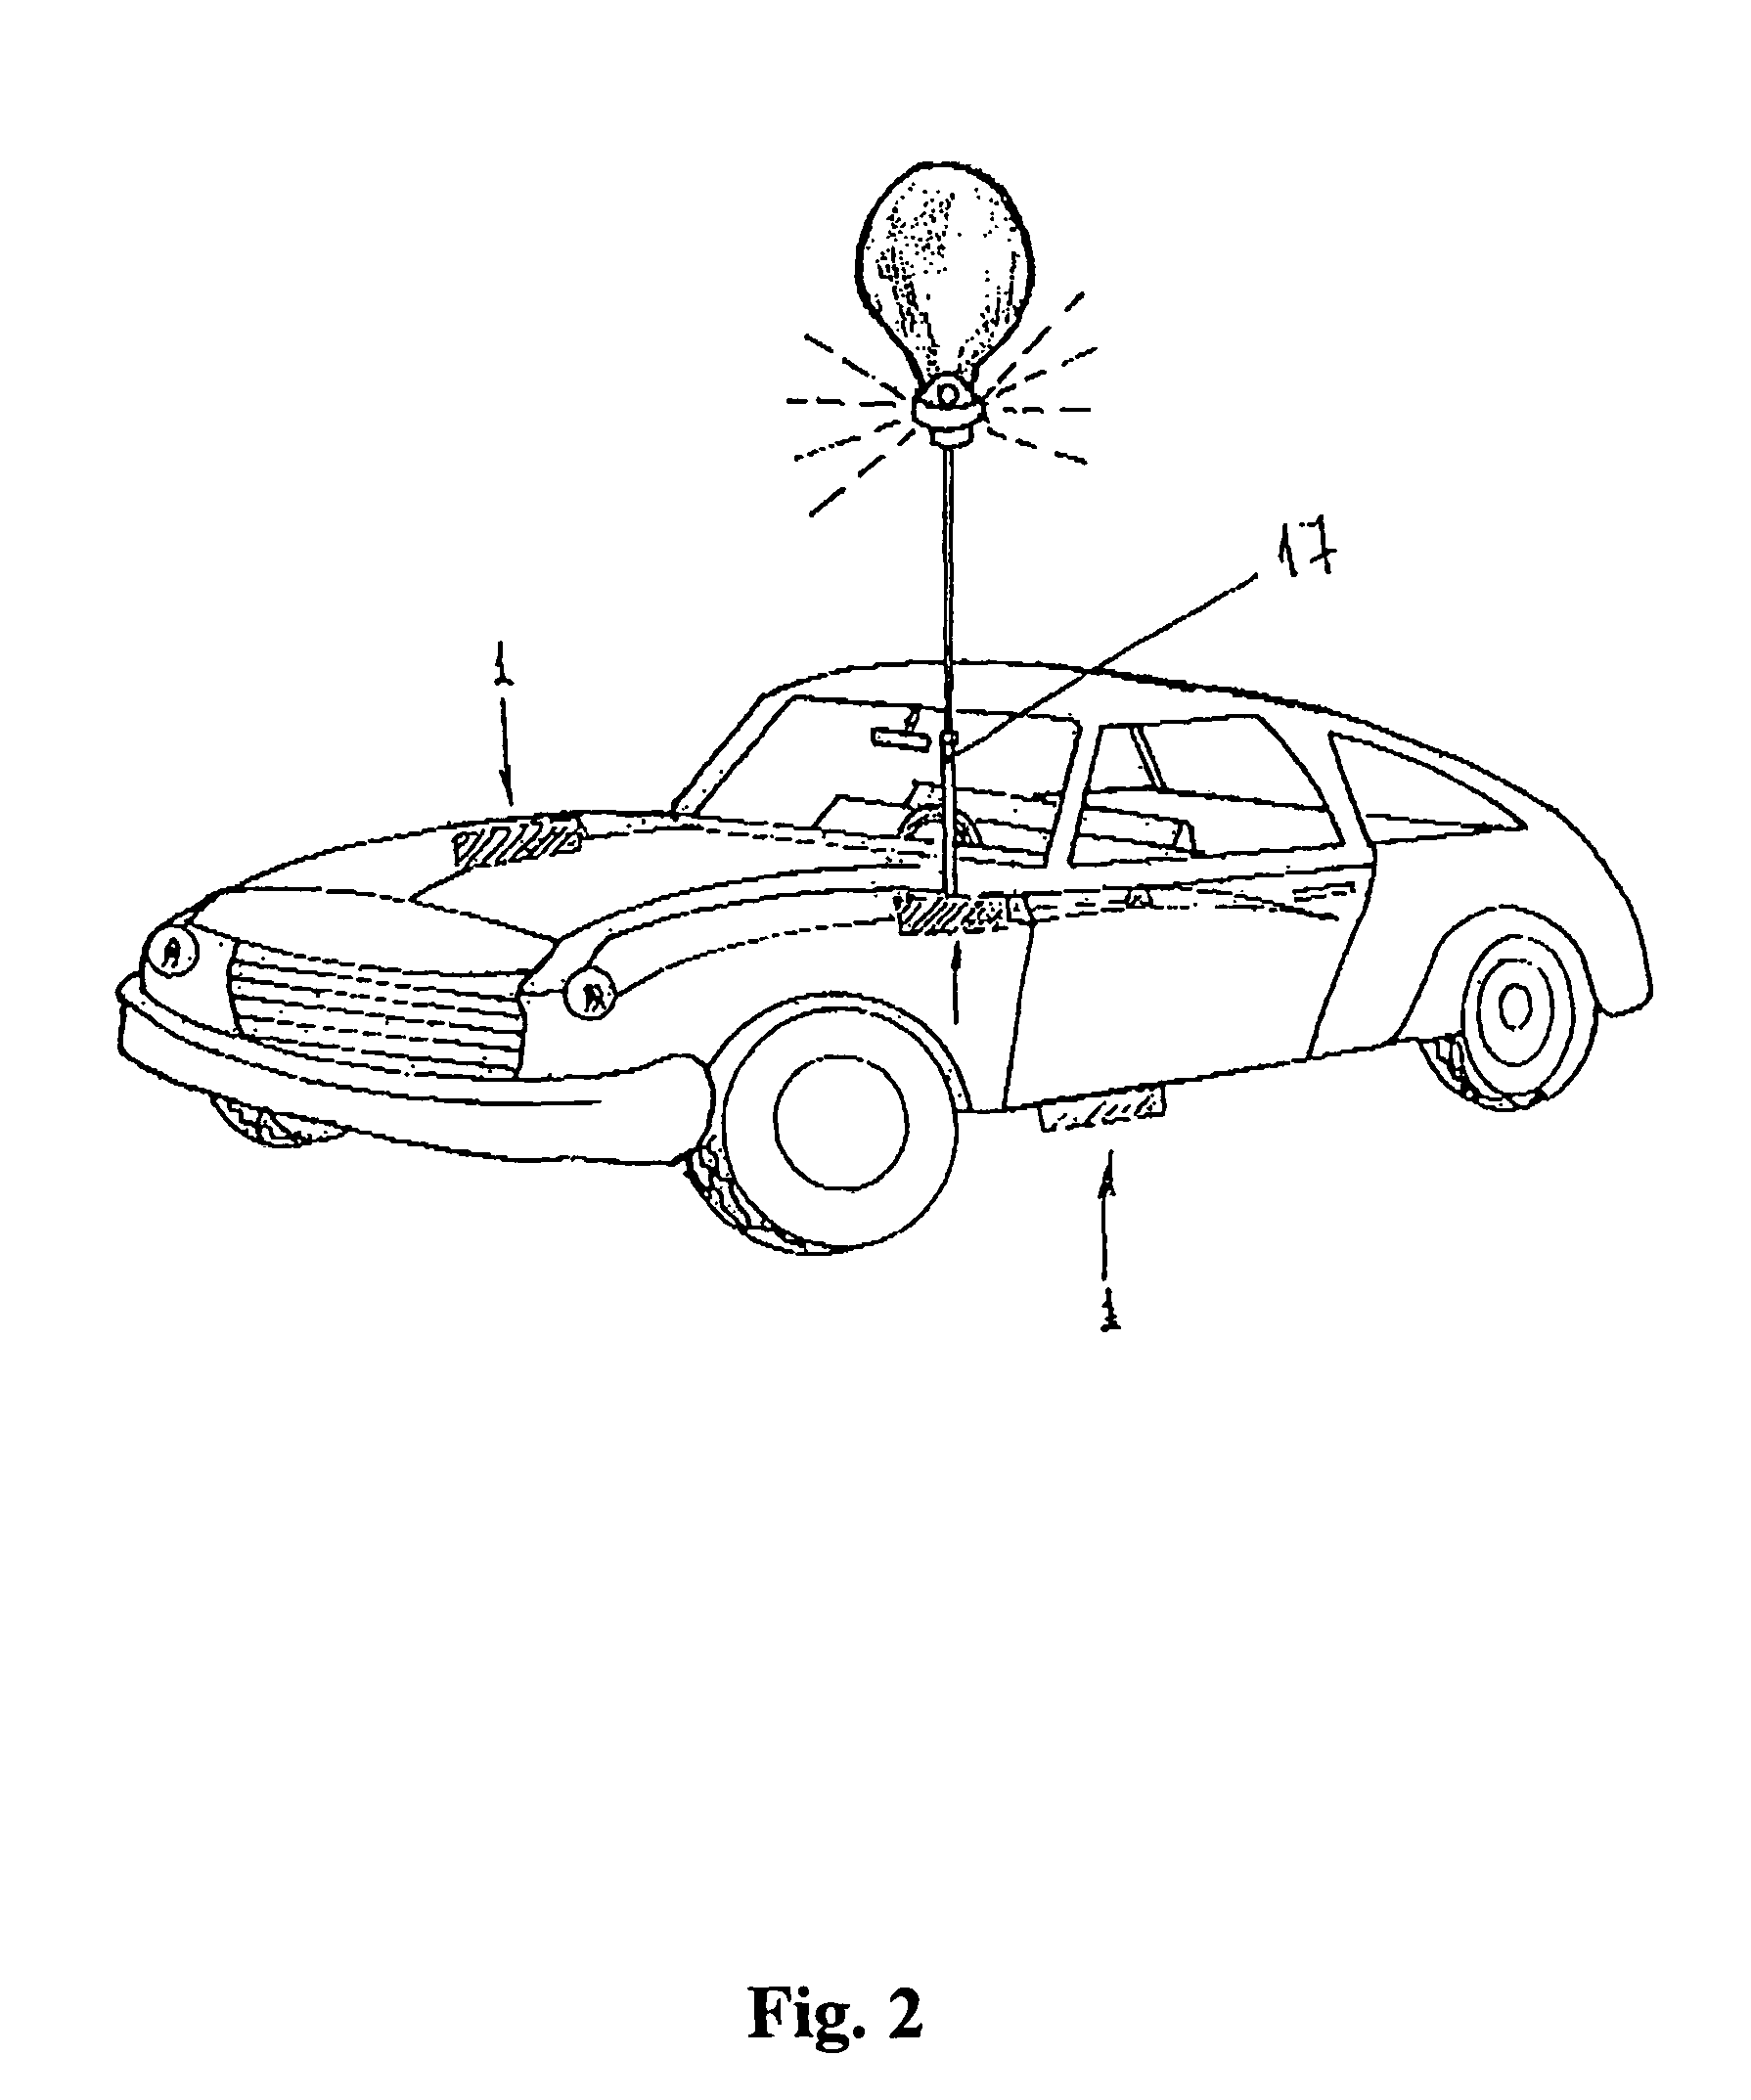 System for signalling and locating vehicles involved in accidents, stopped vehicles and vehicles with mechanical problems